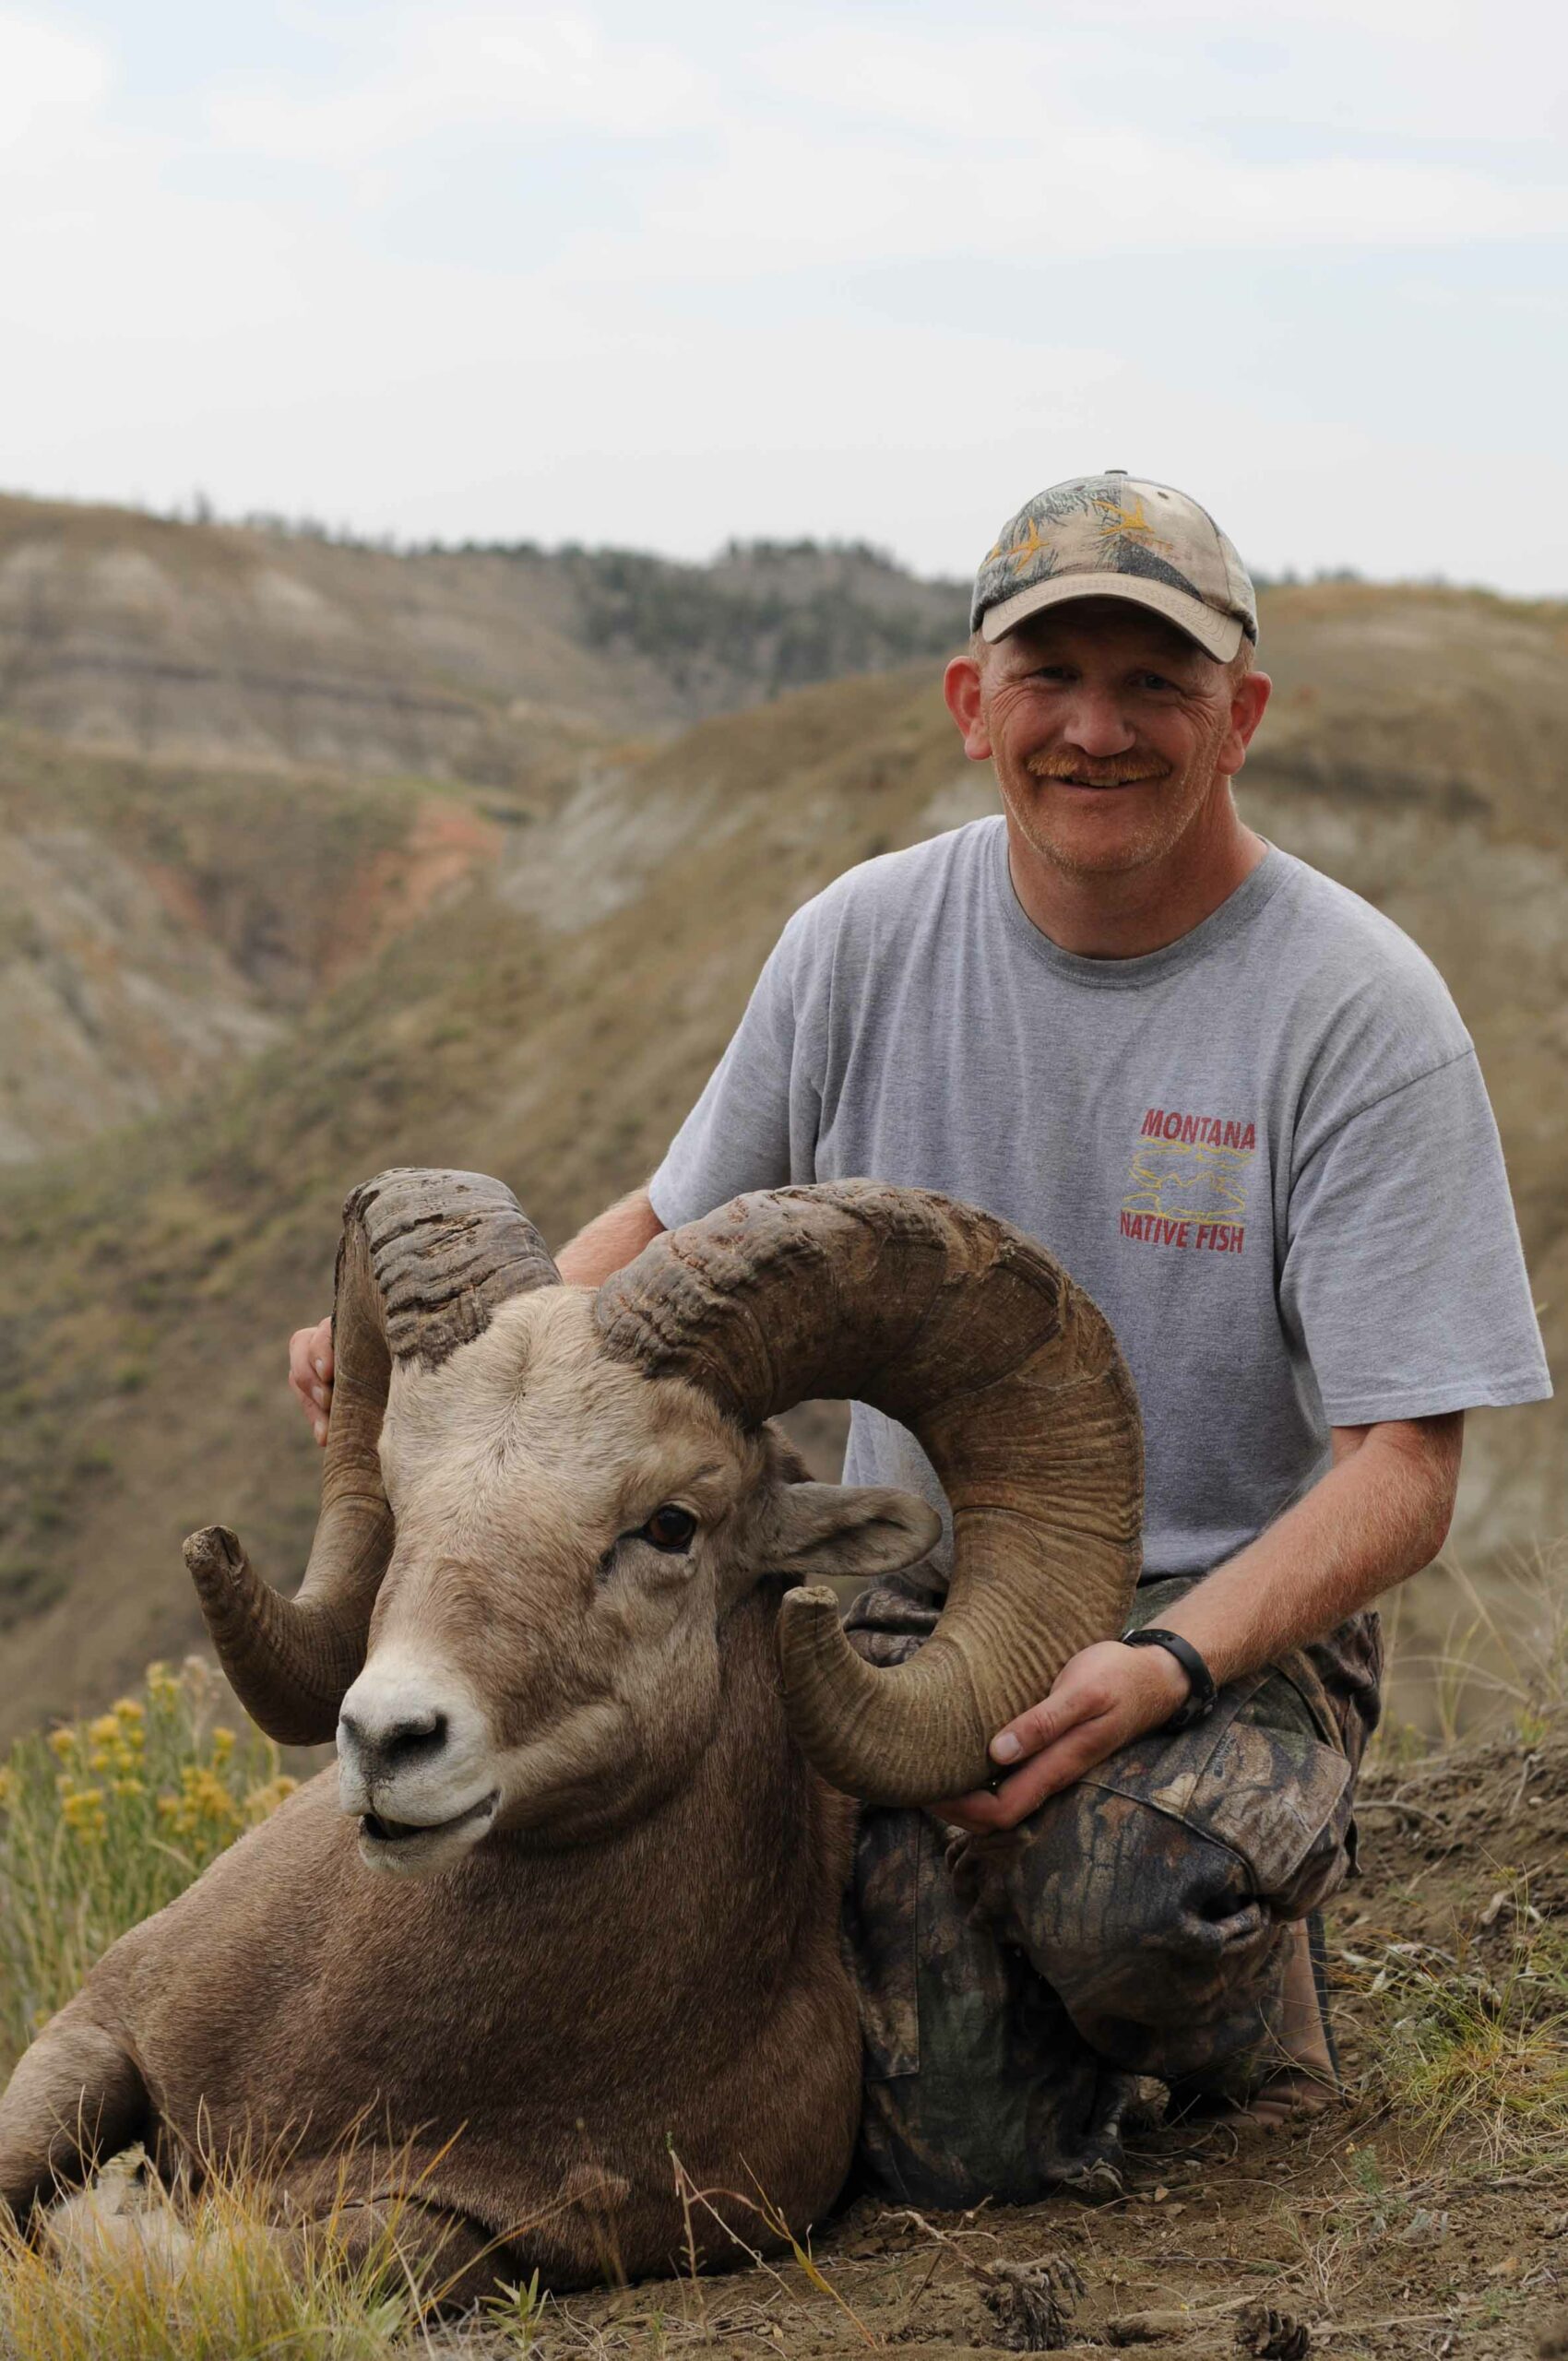 Mark poses with his trophy, the rough gumbo breaks behind him. He has taken a 9-1/2-year old ram on public land. The sheep will make the record book; we green score it at about 186 inches.